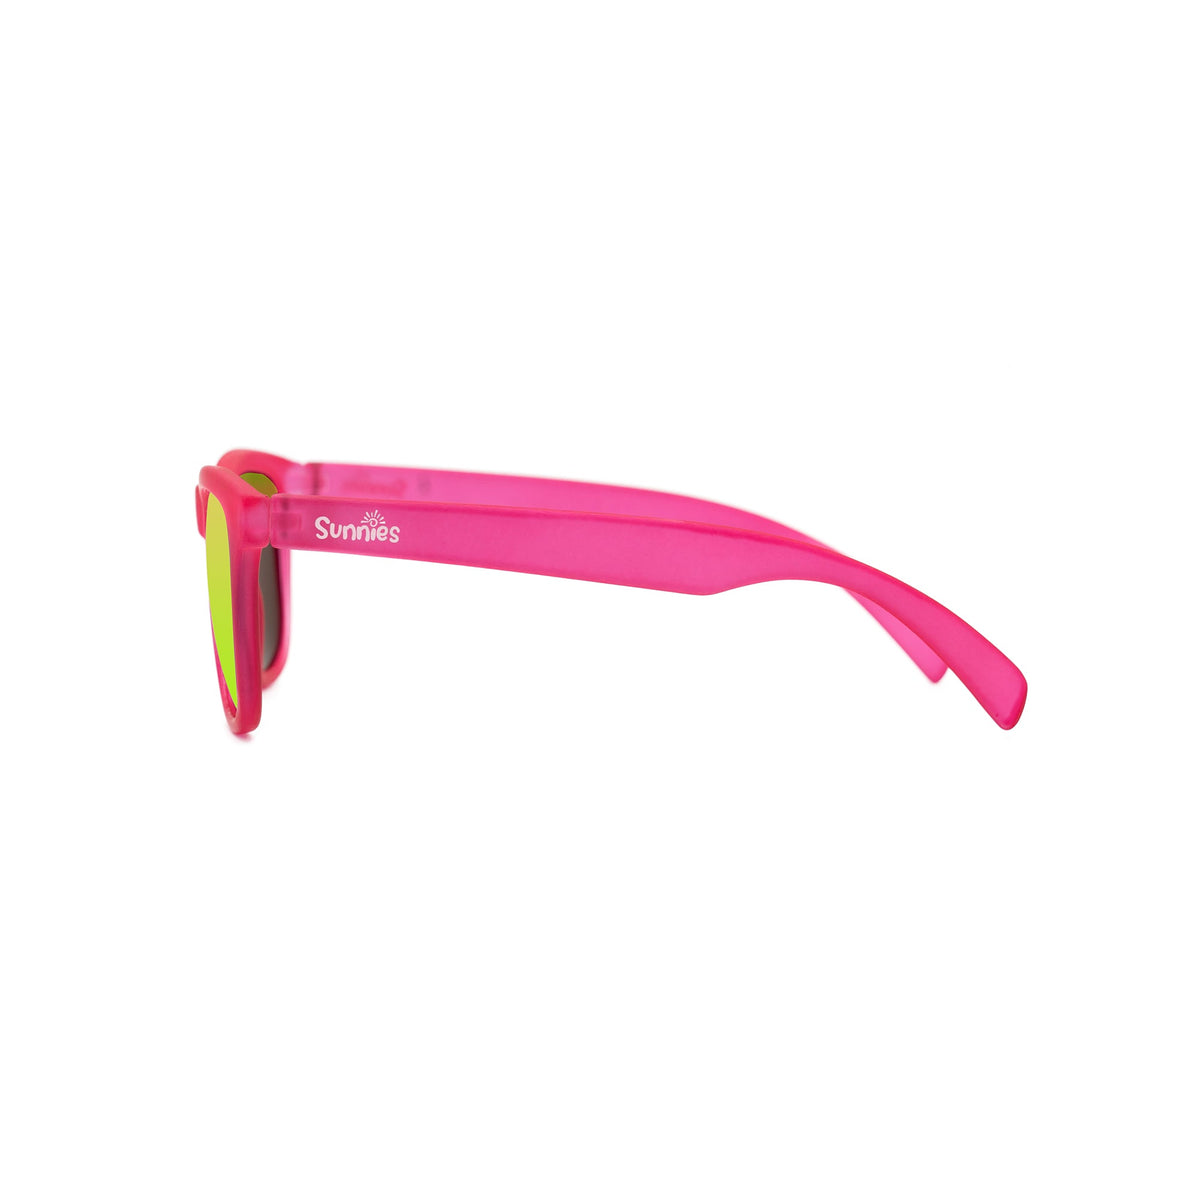 Side view of kids sunglasses with a pink transparent frame